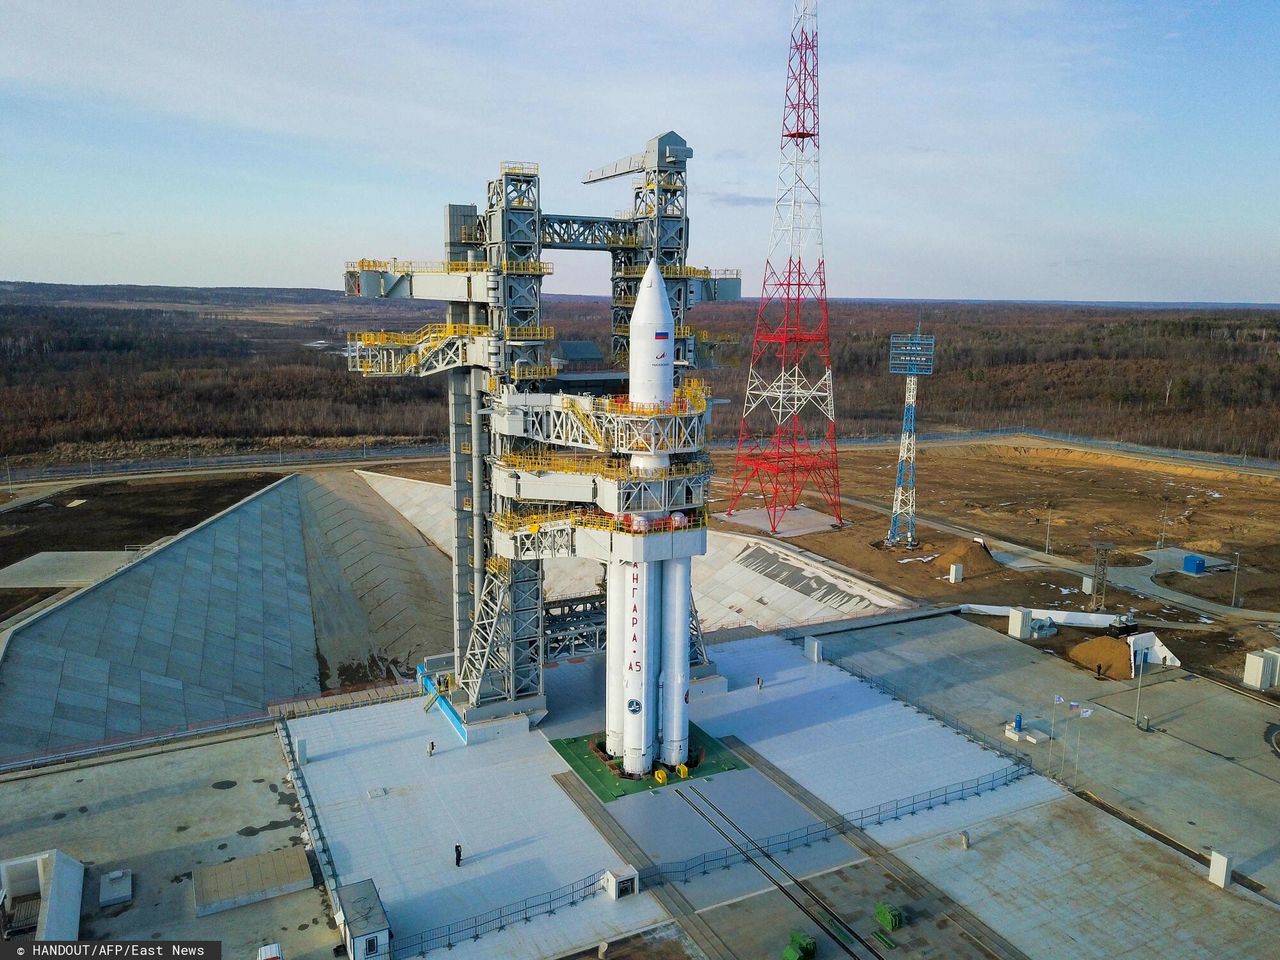 Angara A5 Rocket Launch Stalled: Russia's Space Ambitions in Jeopardy